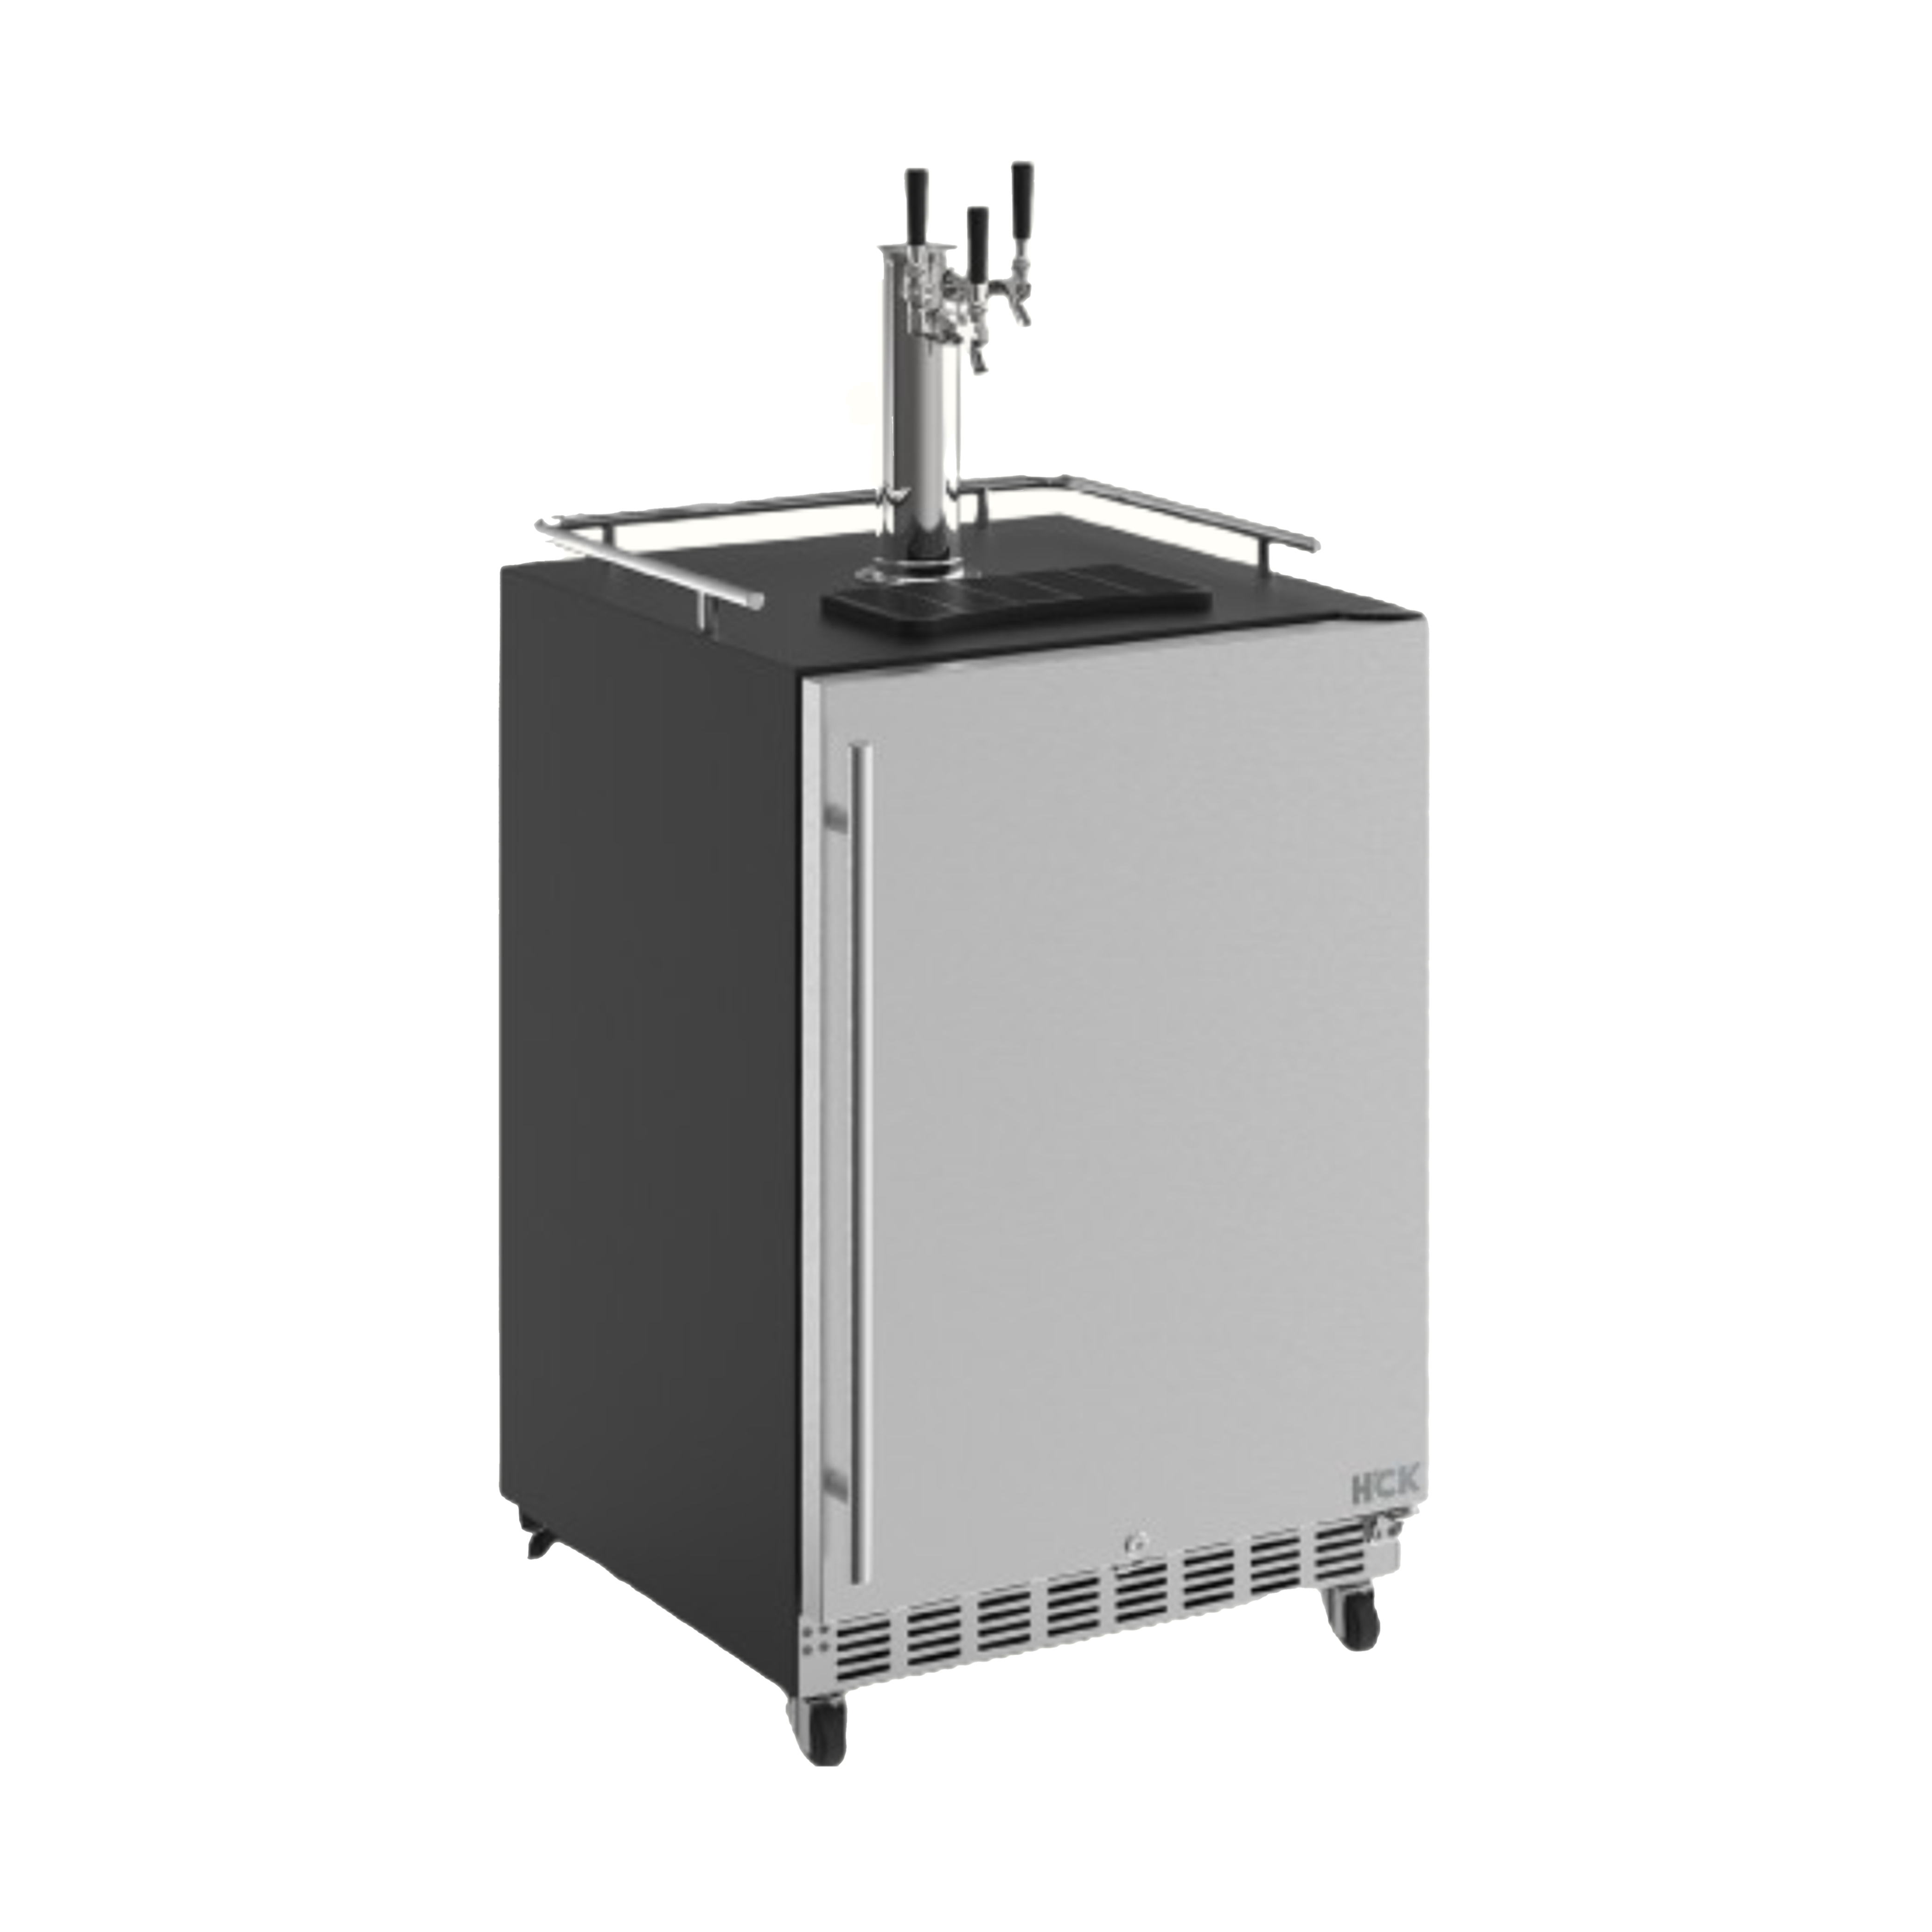 Side view of a 6.04 Cu Ft Undercounter Outdoor Refrigerator Kegerator